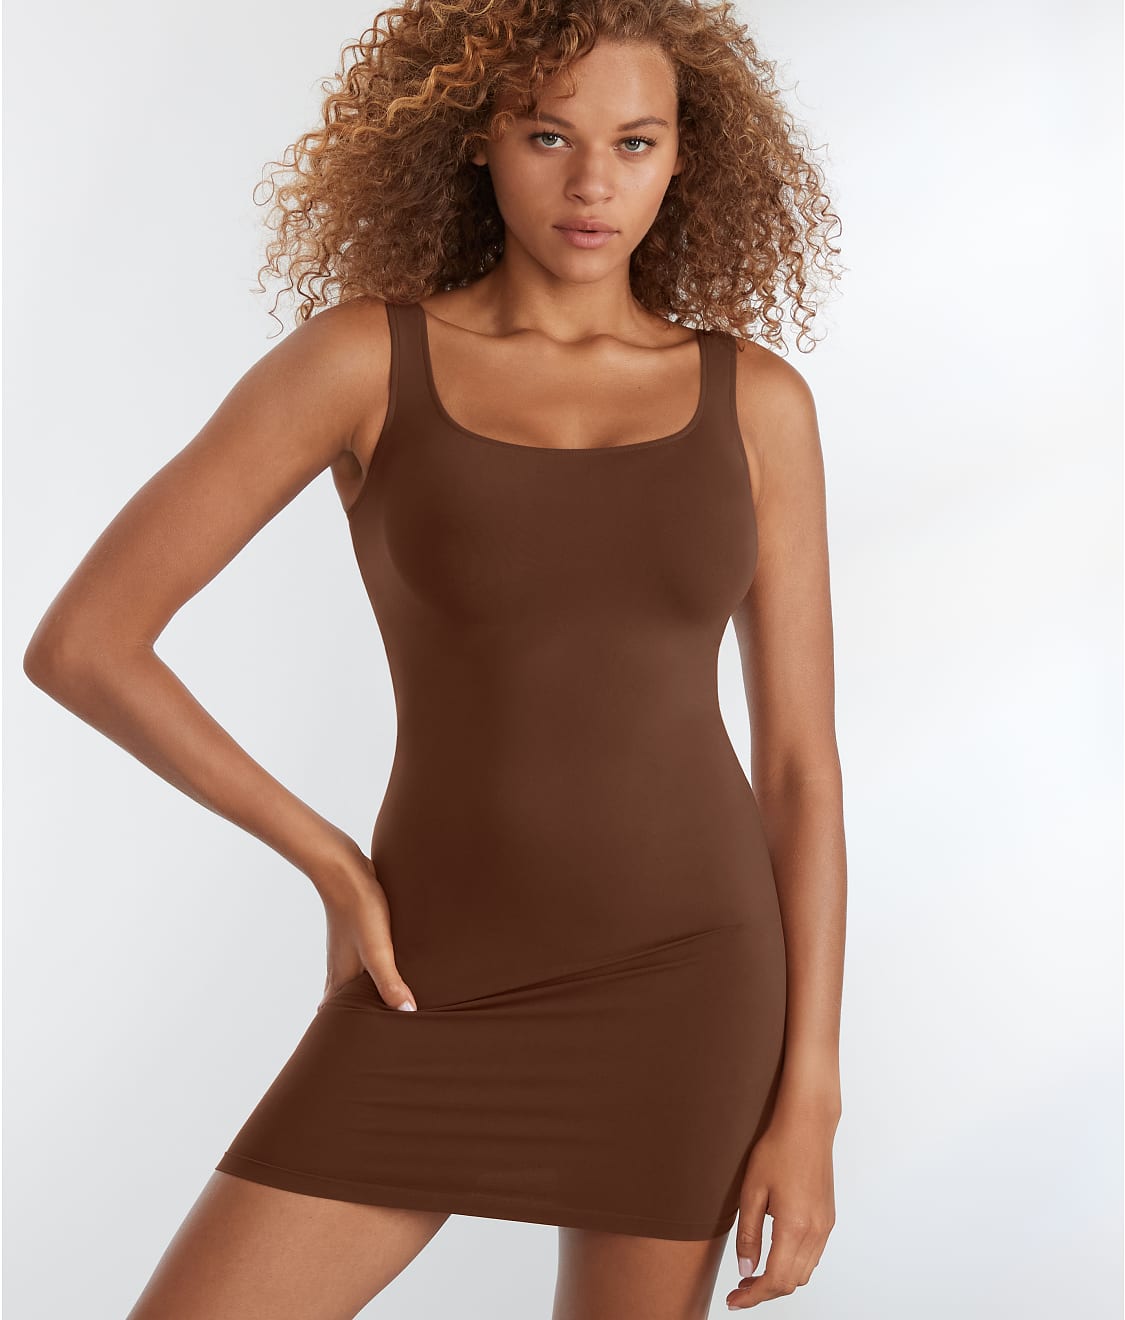 Bare: The Smoothing Seamless Dress D30301